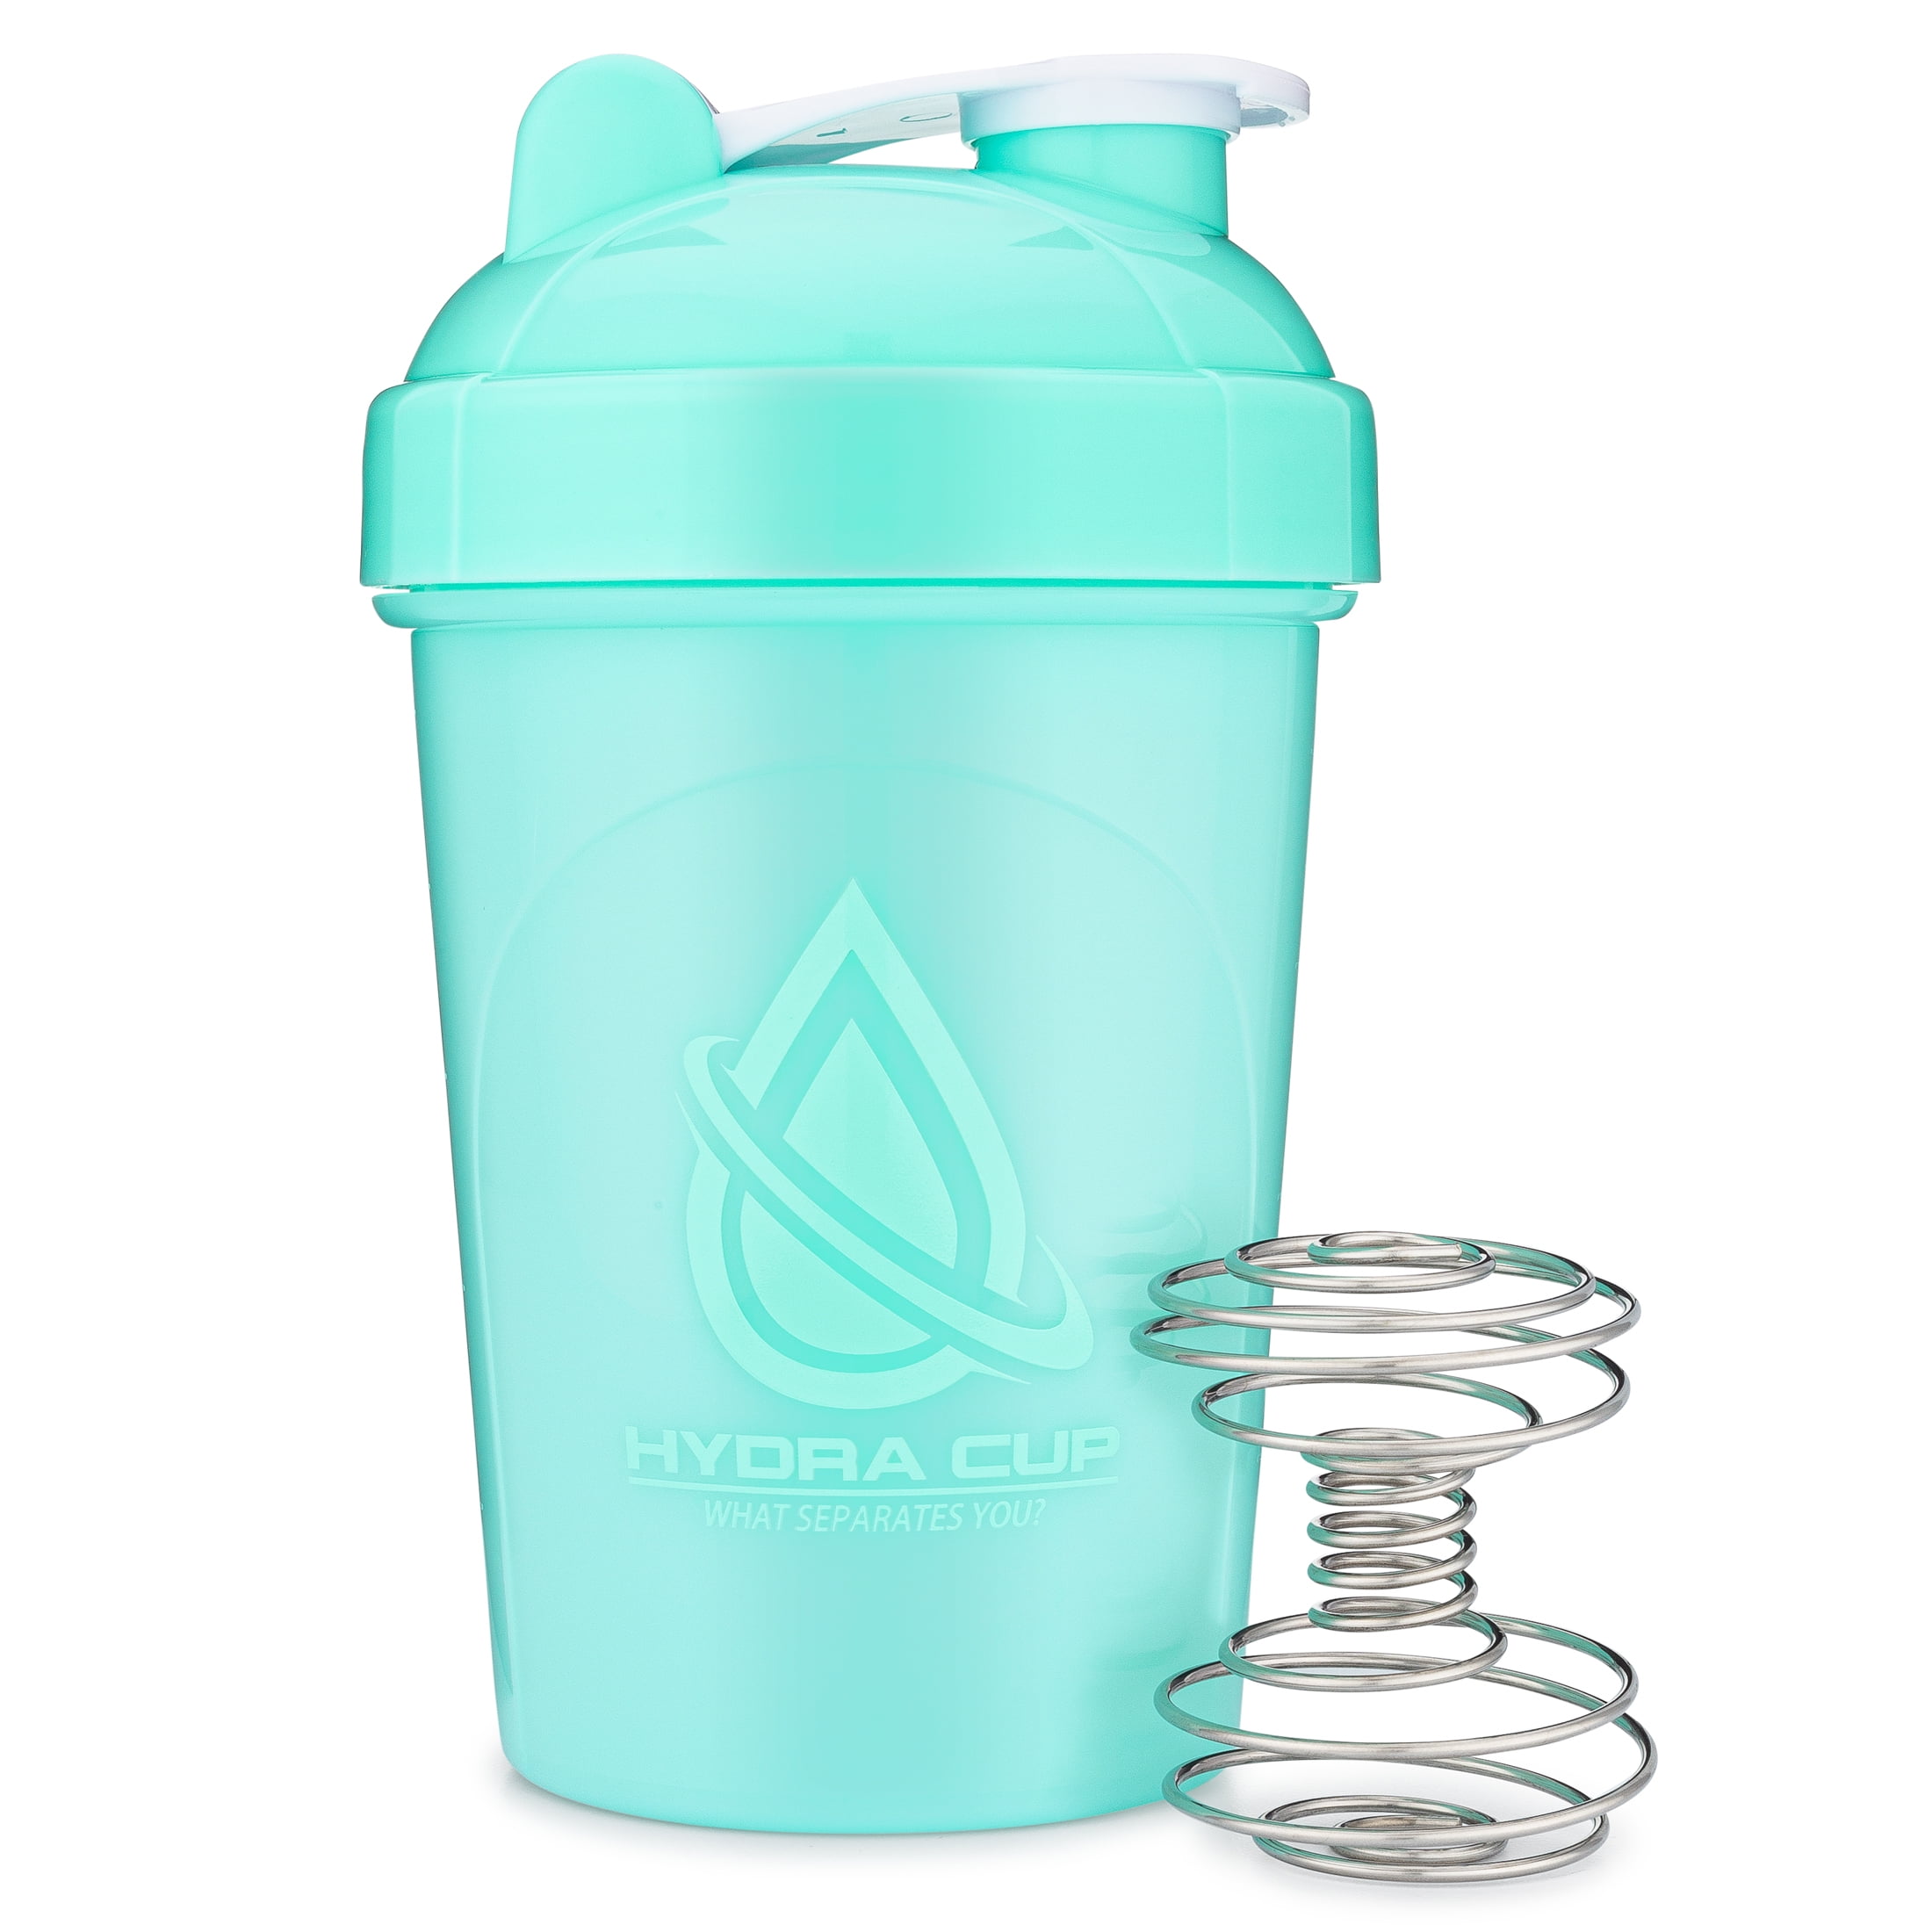 Hydra Cup [4 PACK] - Protein Powder Funnel w/ three compartments, pill &  supplement storage containe…See more Hydra Cup [4 PACK] - Protein Powder